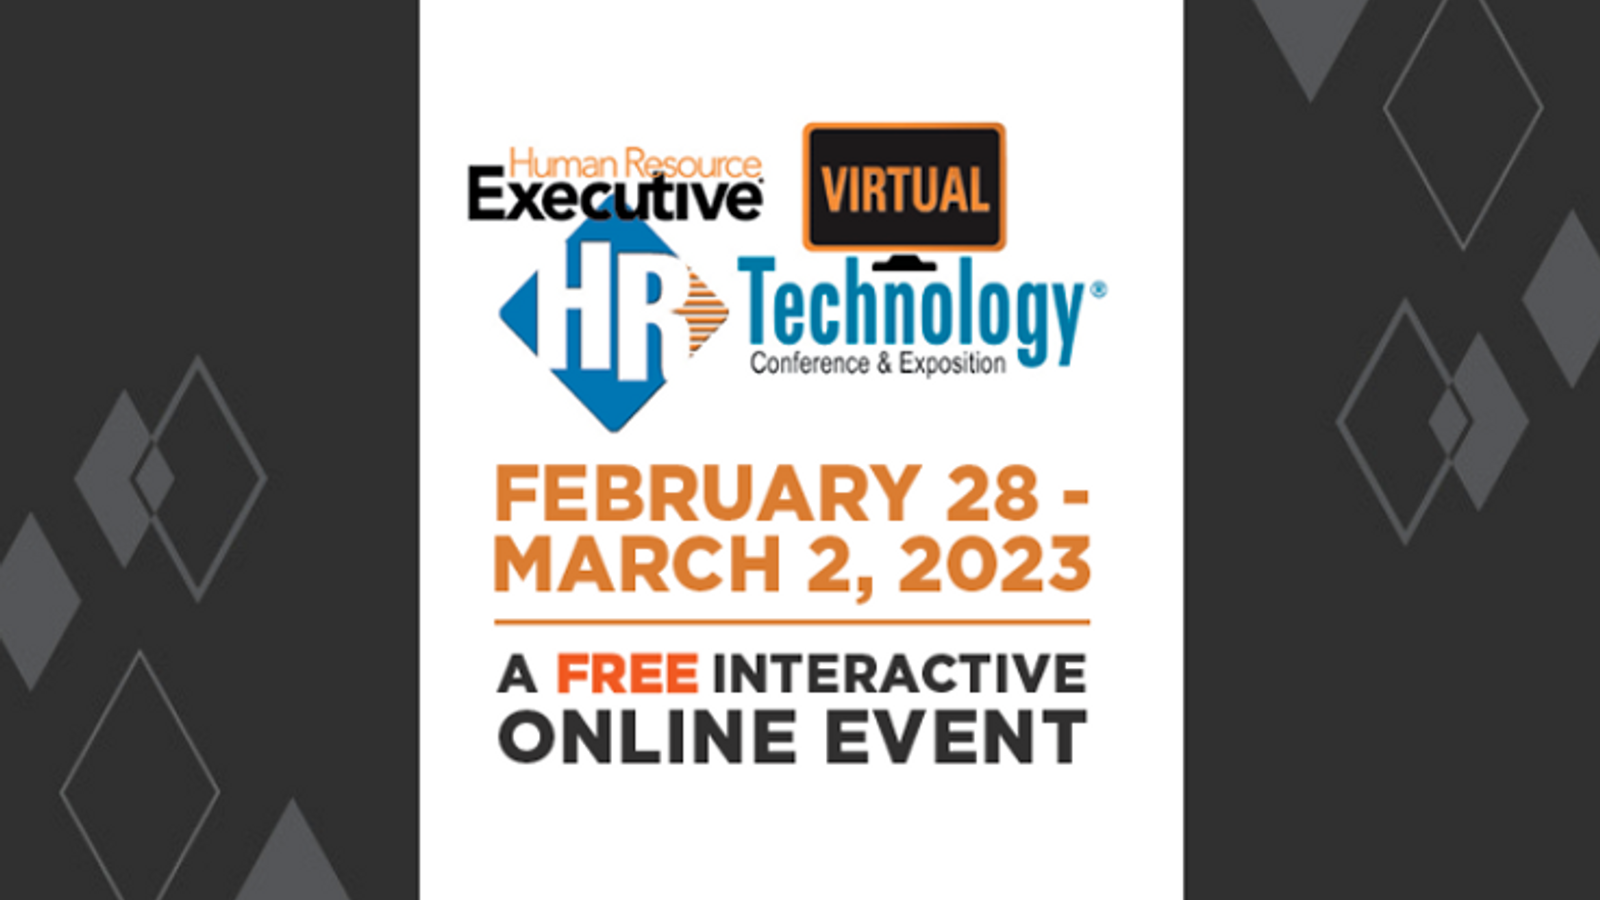 HR Technology Virtual Conference and Exposition, 2023